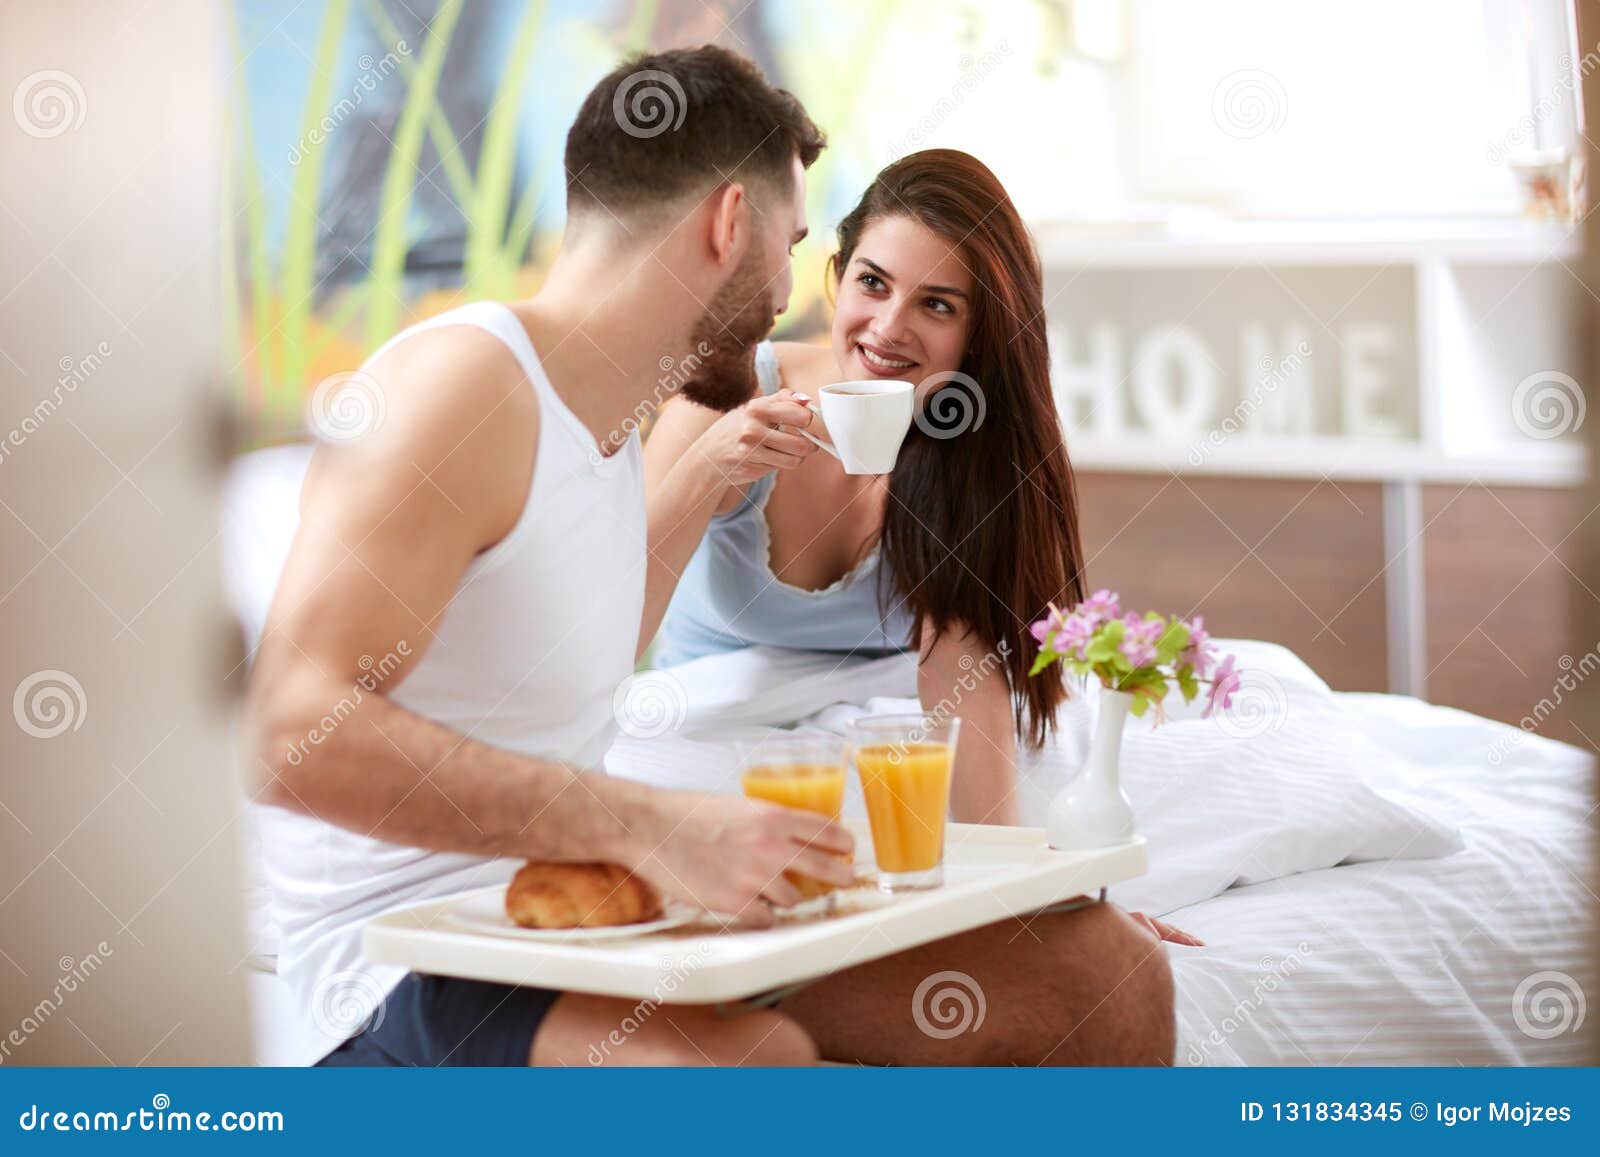 Couple Having Morning Breakfast in Bed Stock Image - Image of love ...